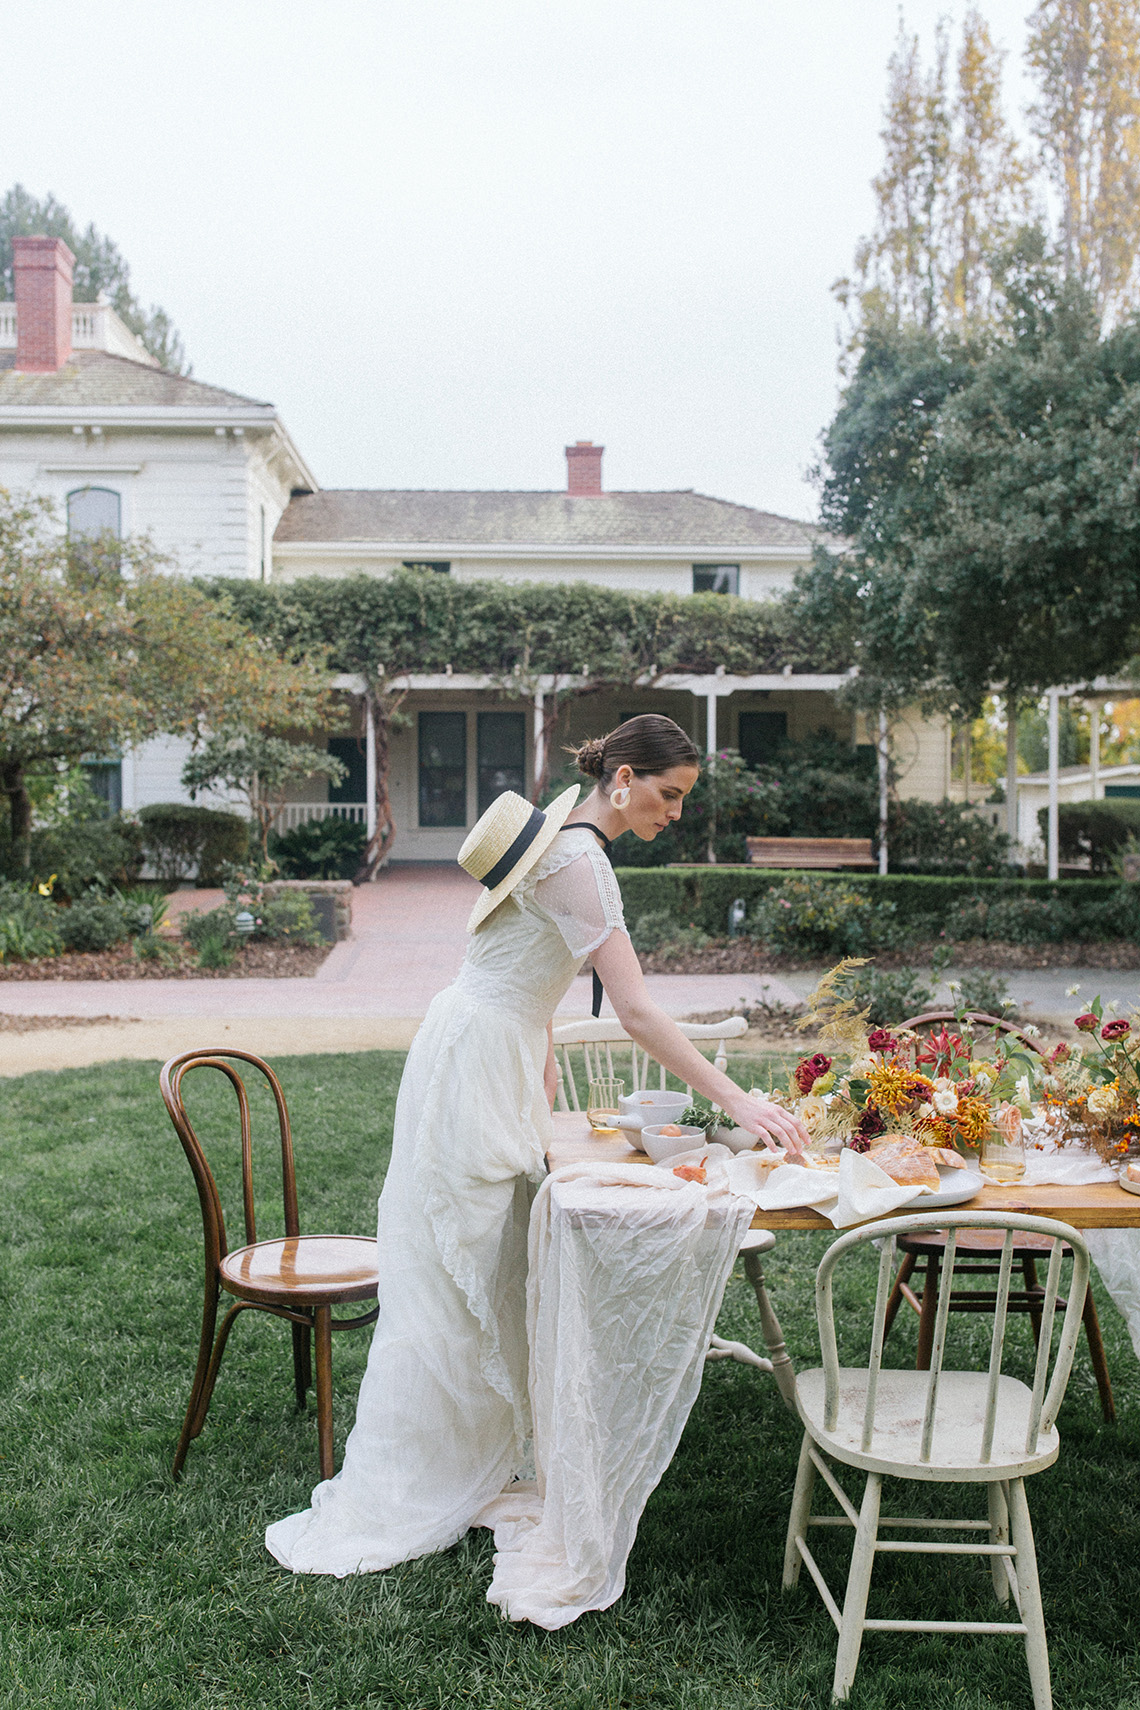 French Garden Party Wedding Inspiration for The Cool Bride – Hamee Ha Photography 19